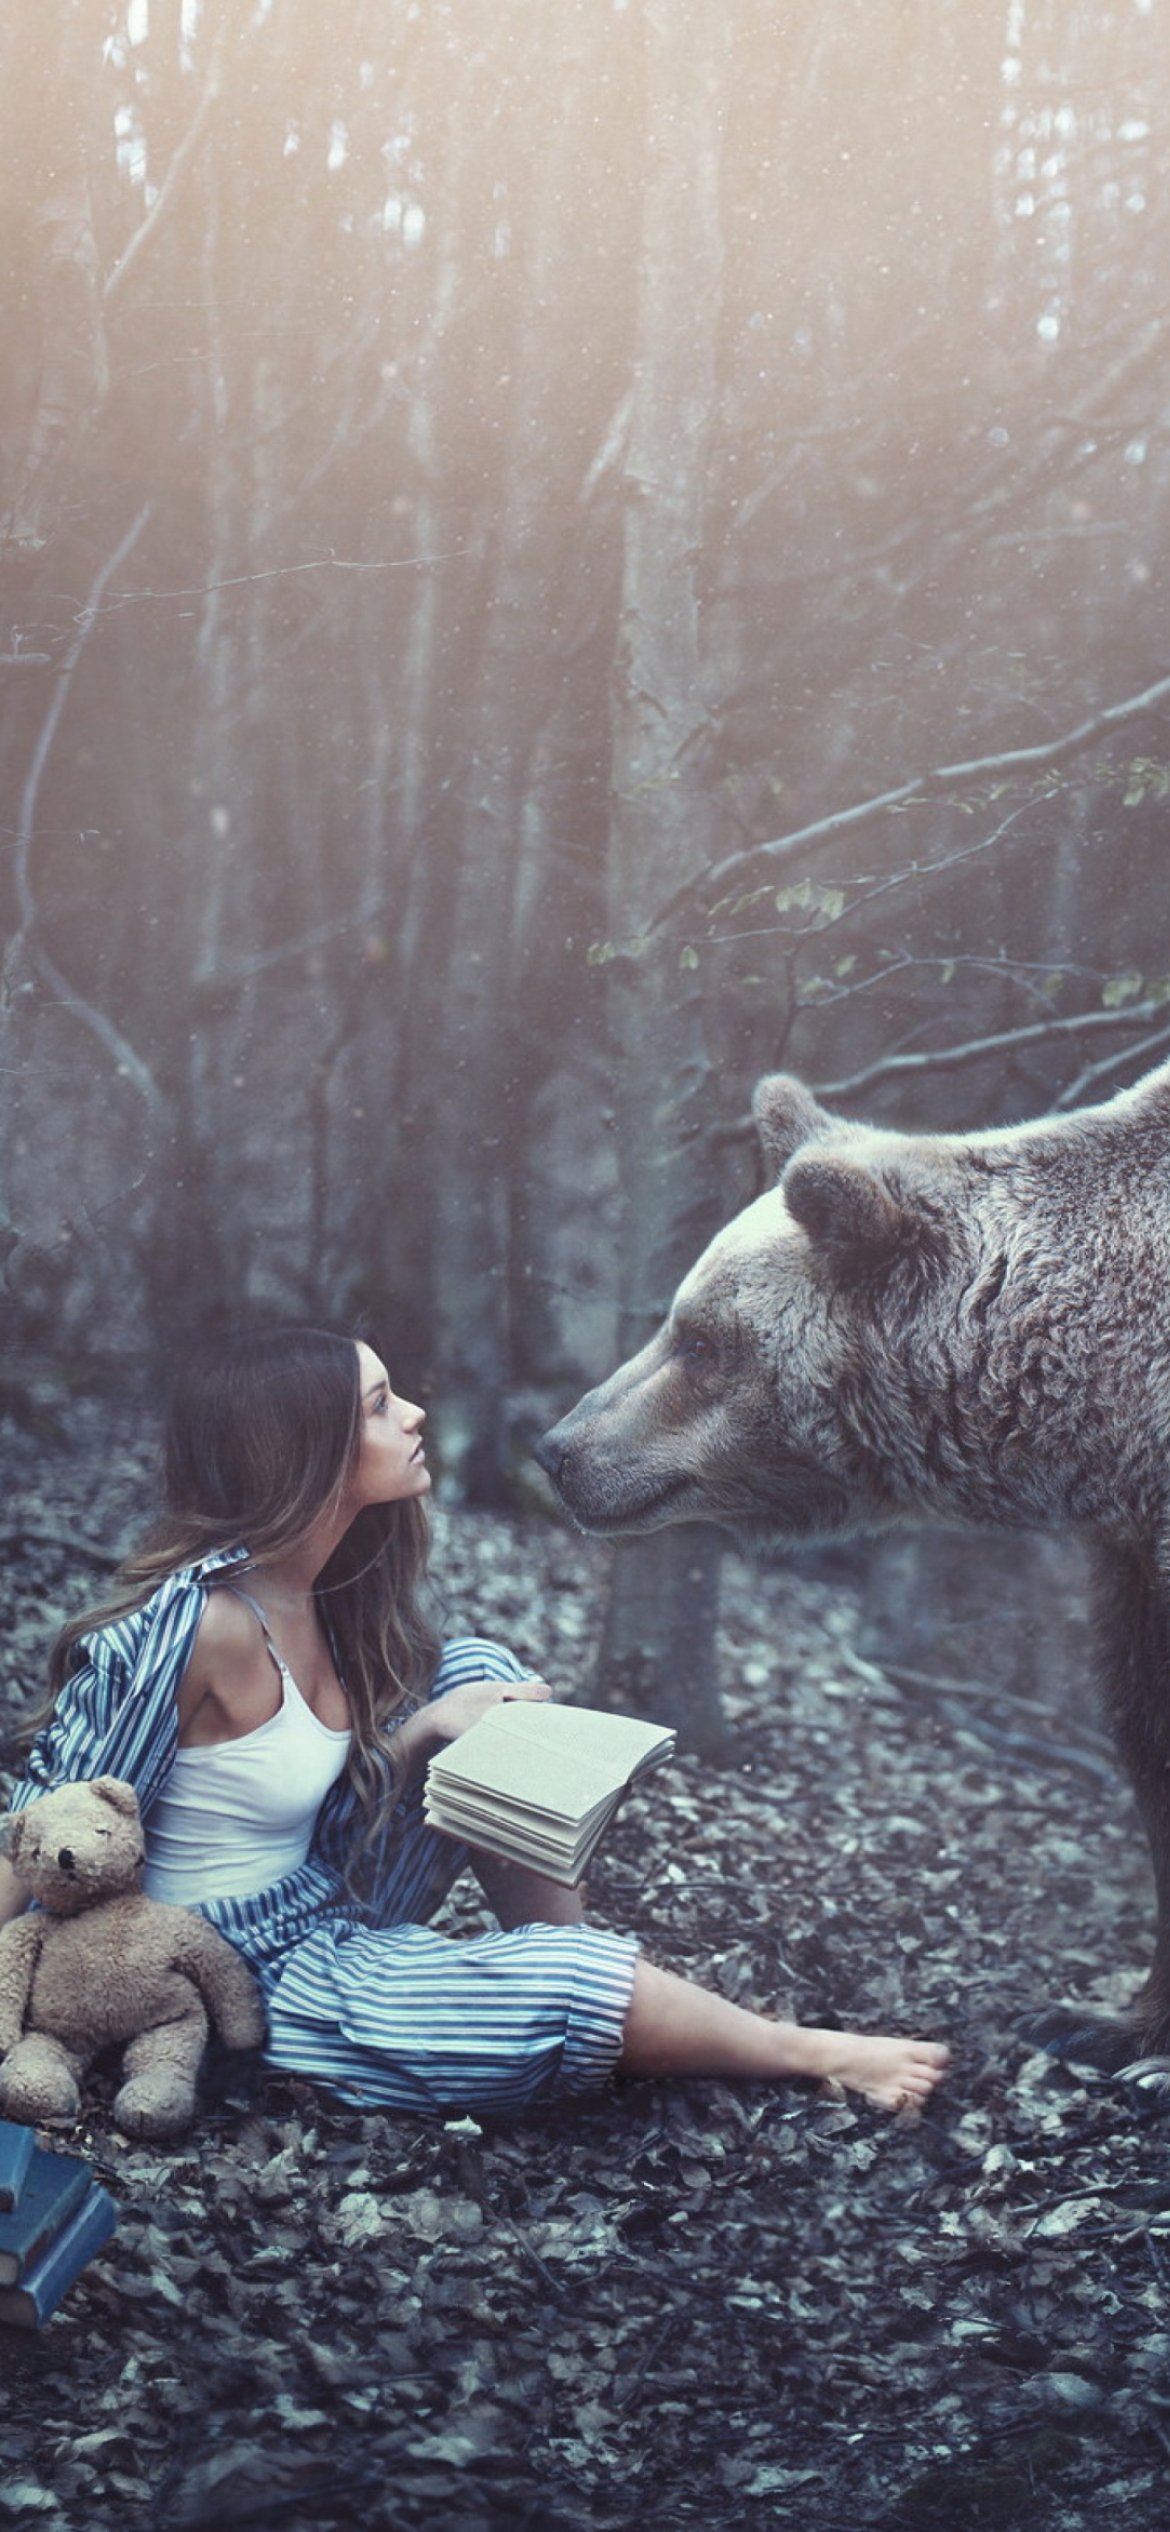 Girl And Two Bears In Forest By Rosie Hardy Photographer screenshot #1 1170x2532